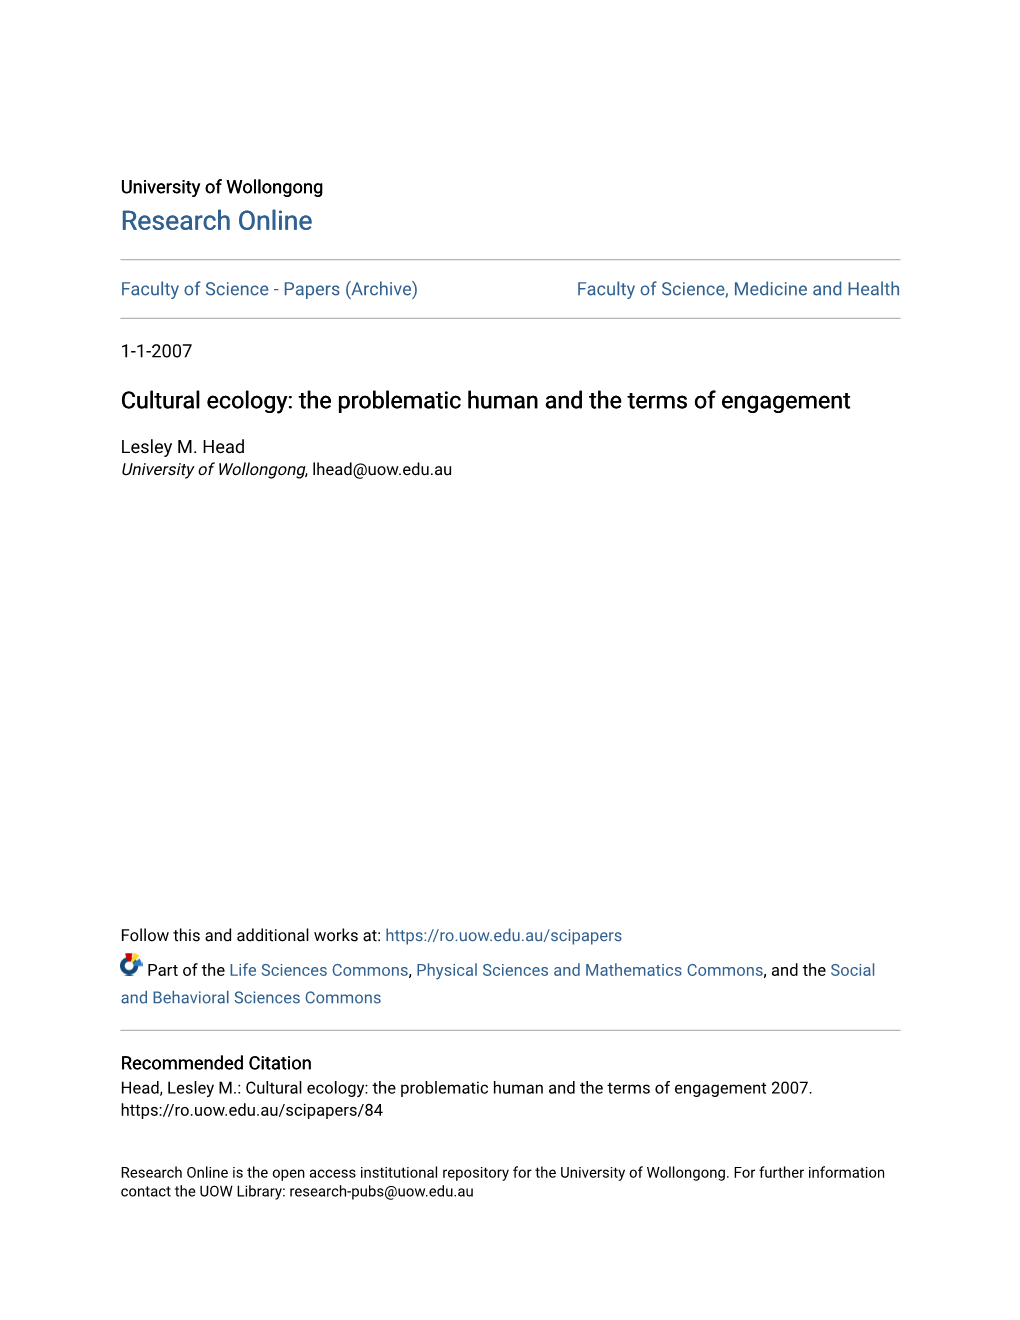 Cultural Ecology: the Problematic Human and the Terms of Engagement